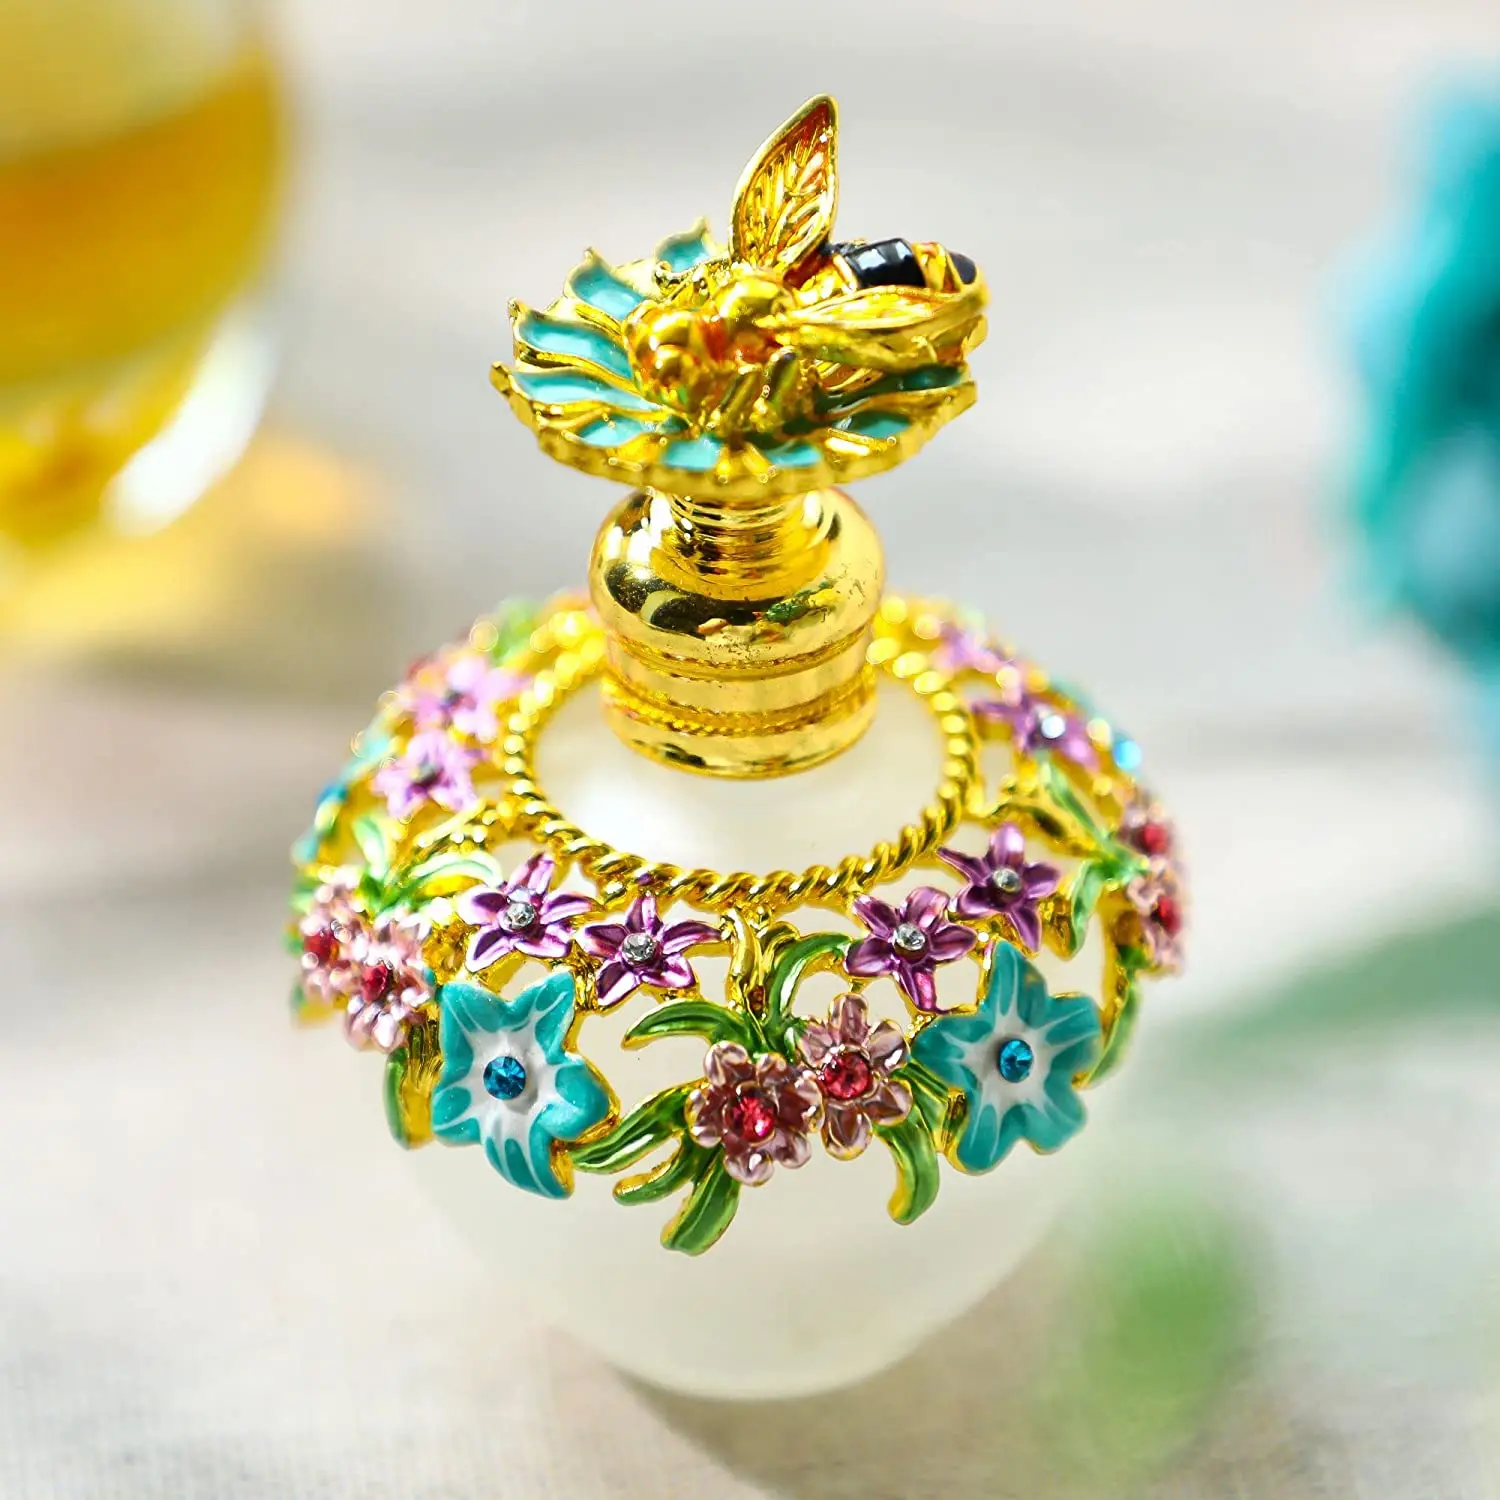 H&D Fancy Glass Perfume Bottle Empty with Flowers Bee Charm Decorative Vintage Crystal Perfume Decanter(Golden,40ML) baby winter knit hat boys girls warm cap fashion toddlers hat with pom pom charm